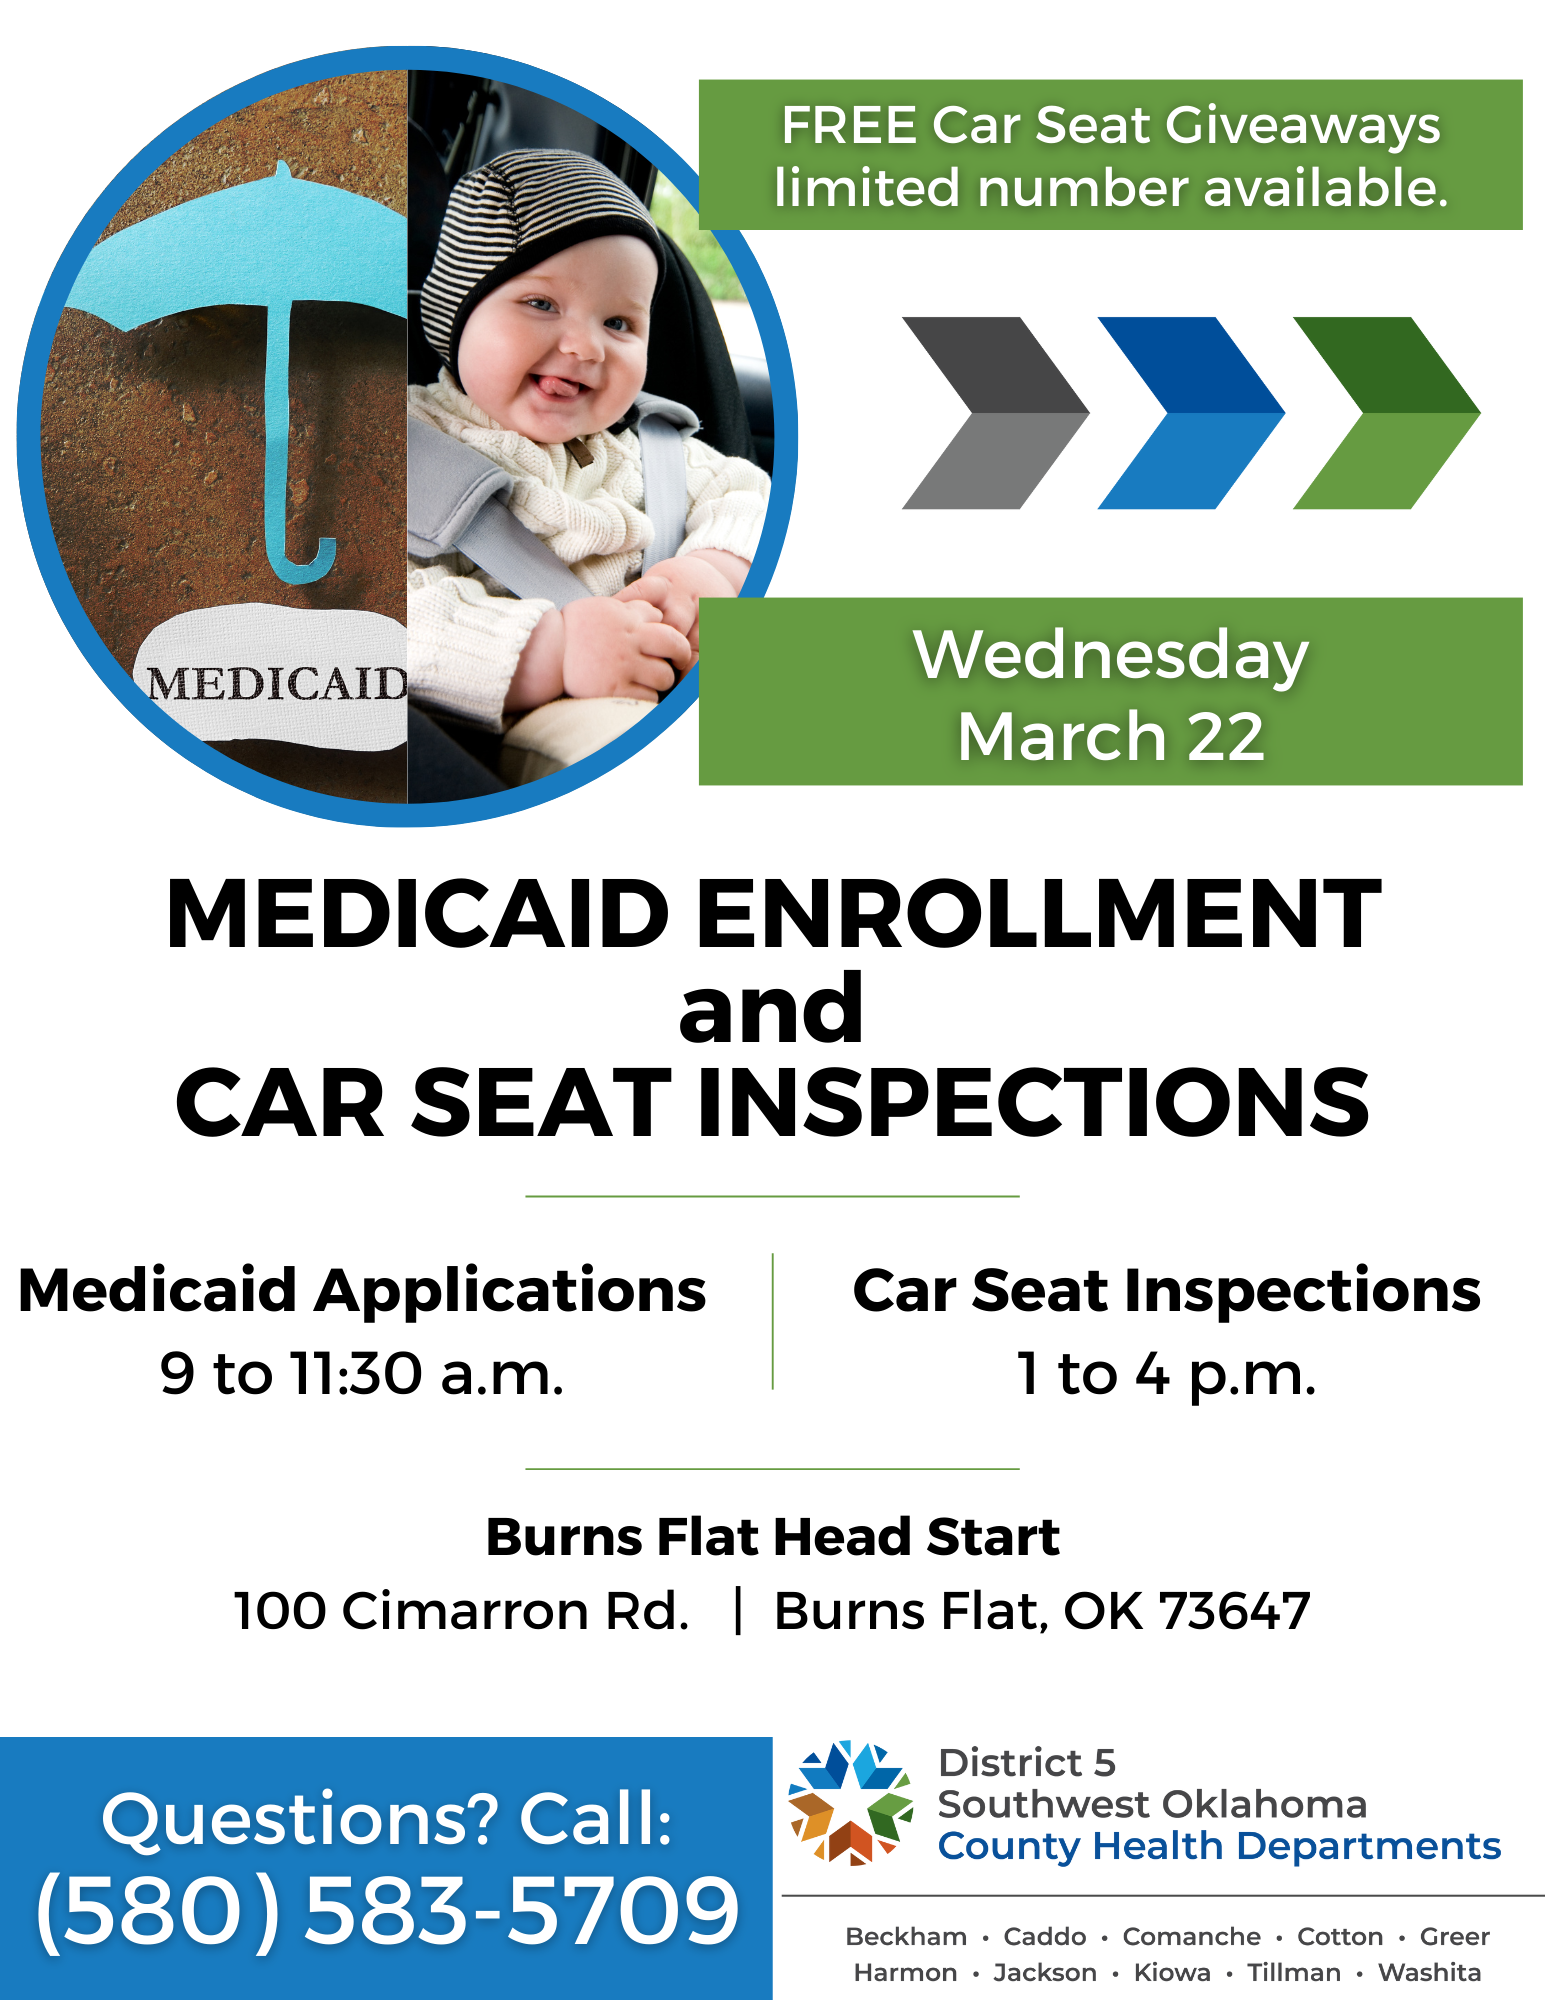 Medicaid and Car Seat Event - Flyer